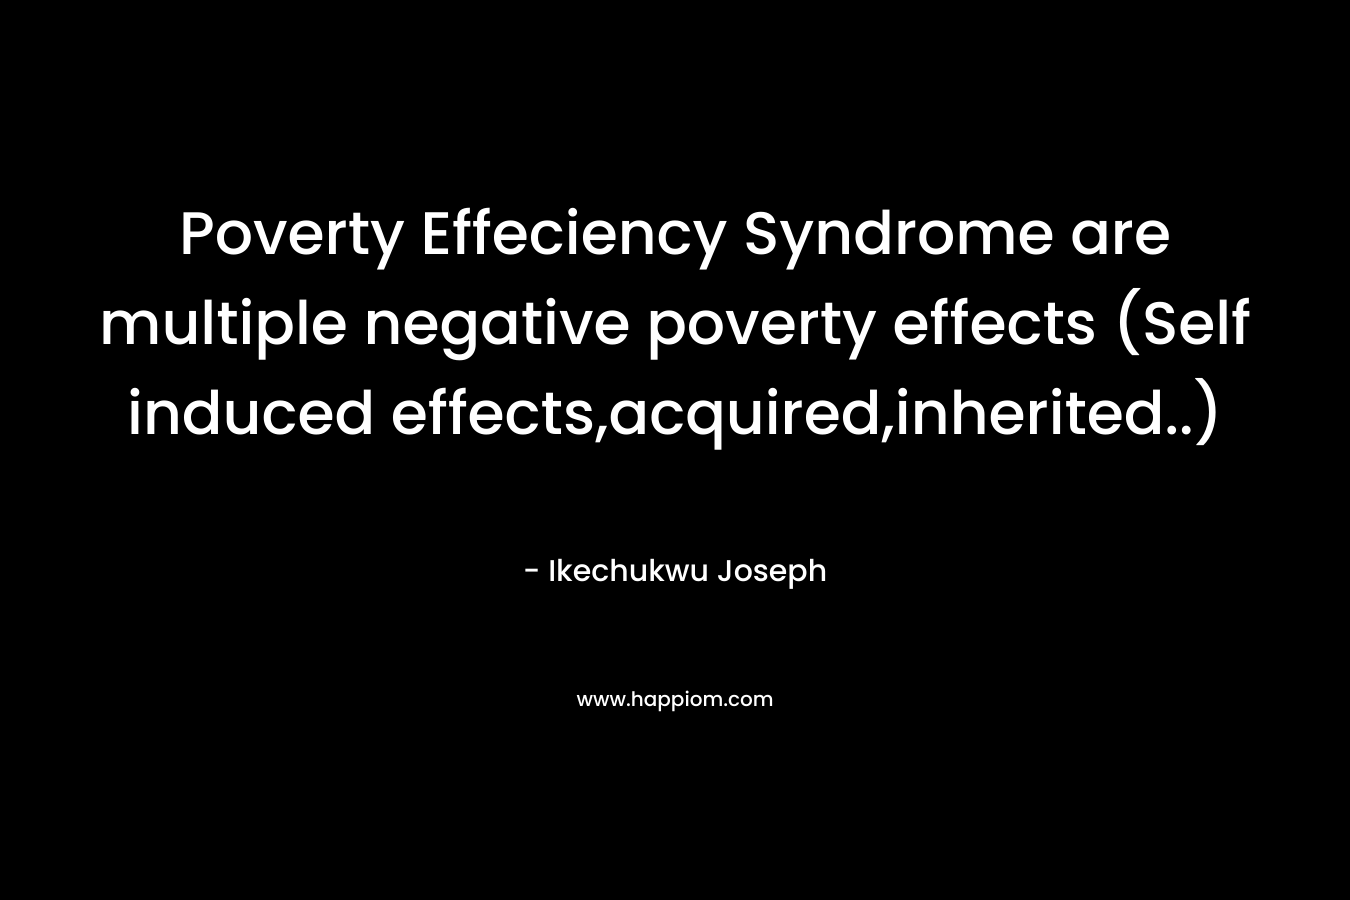 Poverty Effeciency Syndrome are multiple negative poverty effects (Self induced effects,acquired,inherited..) – Ikechukwu Joseph